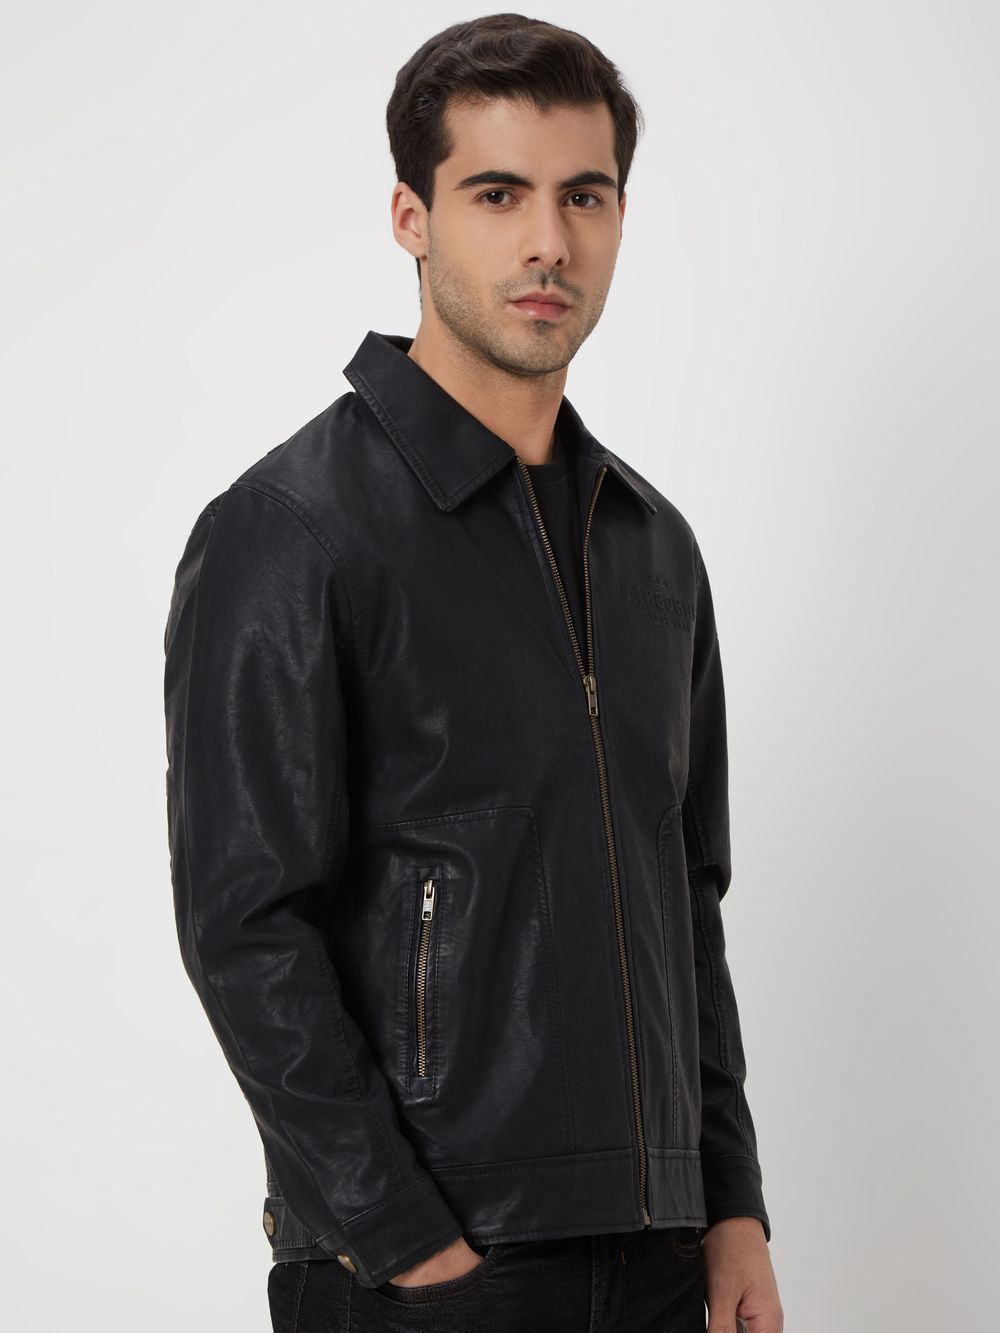 Black Faux Leather Jacket With Embossed Branding